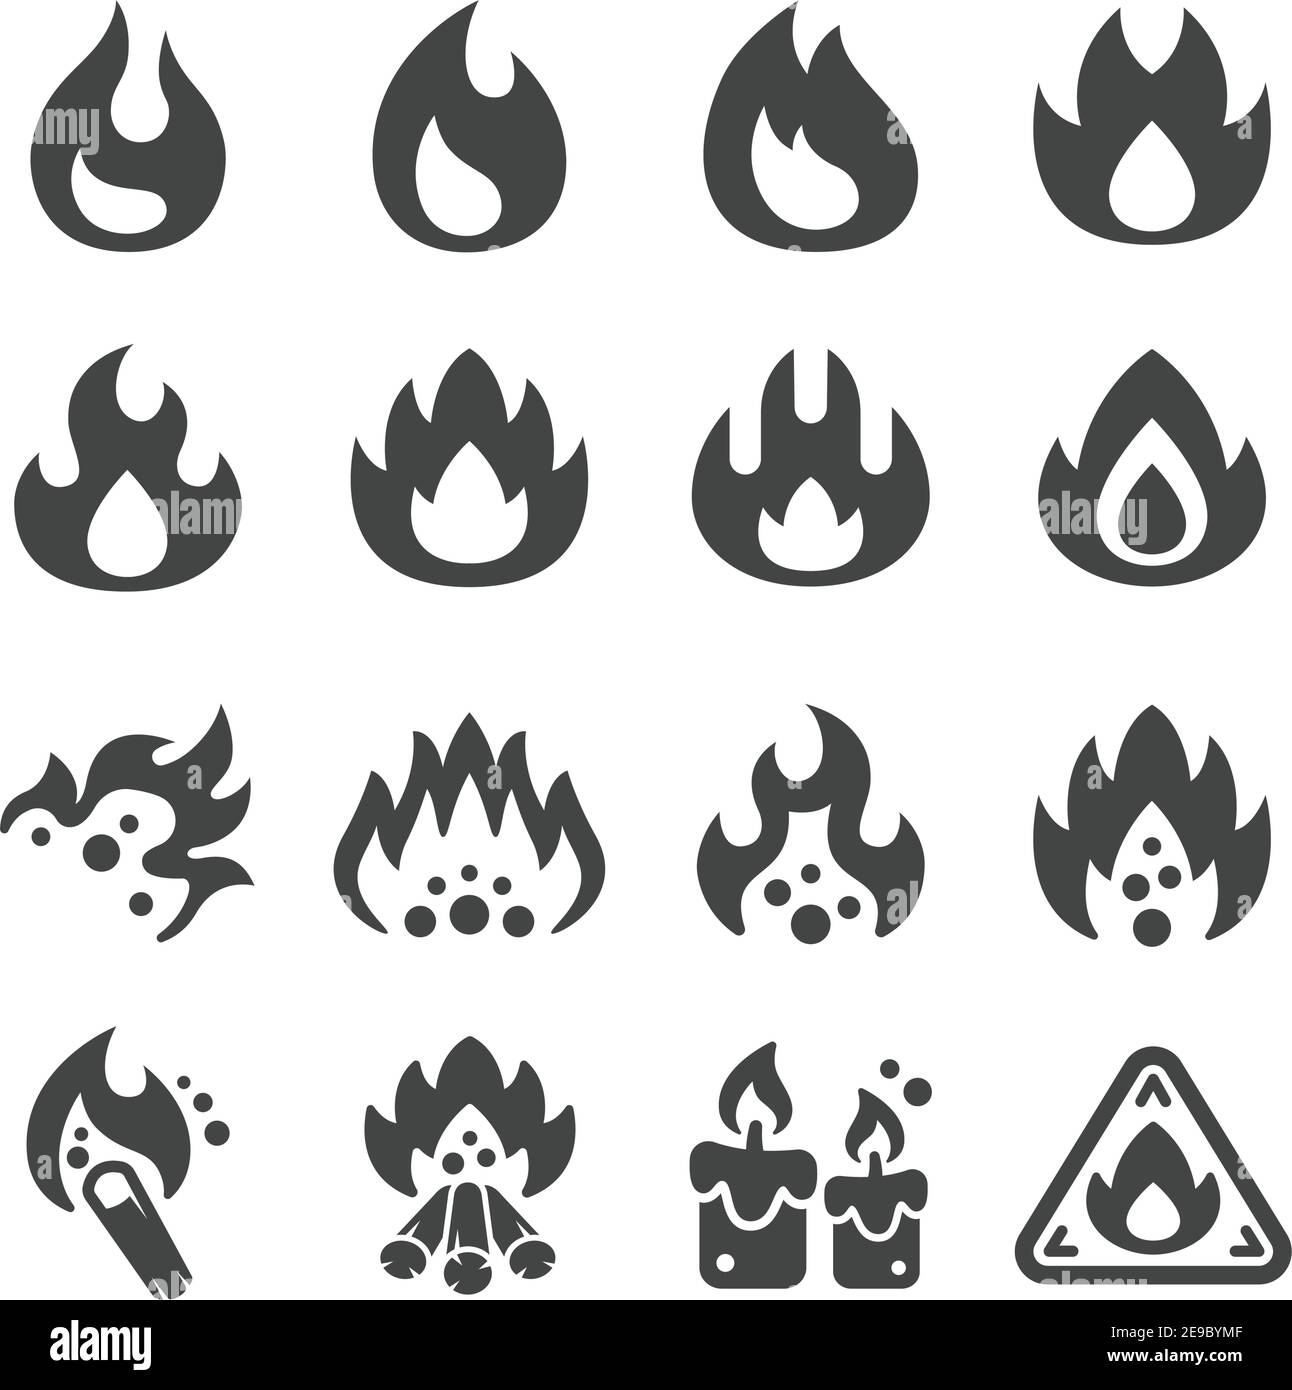 fire and flame icon set,vector and illustration Stock Vector